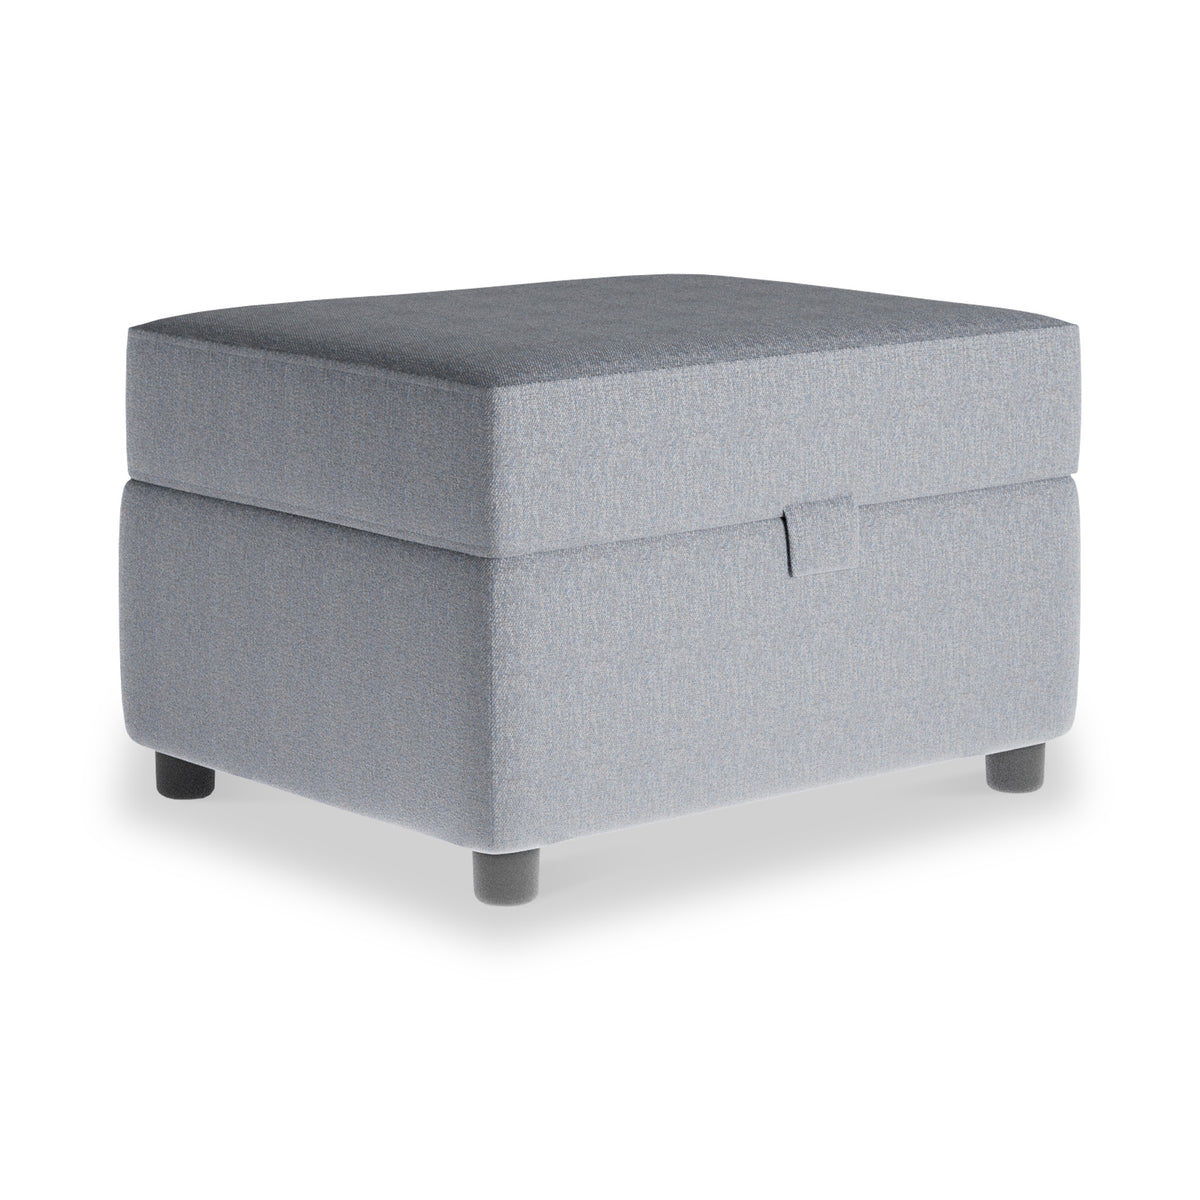 Jude Thunderstorm Small Storage Footstool from Roseland Furniture